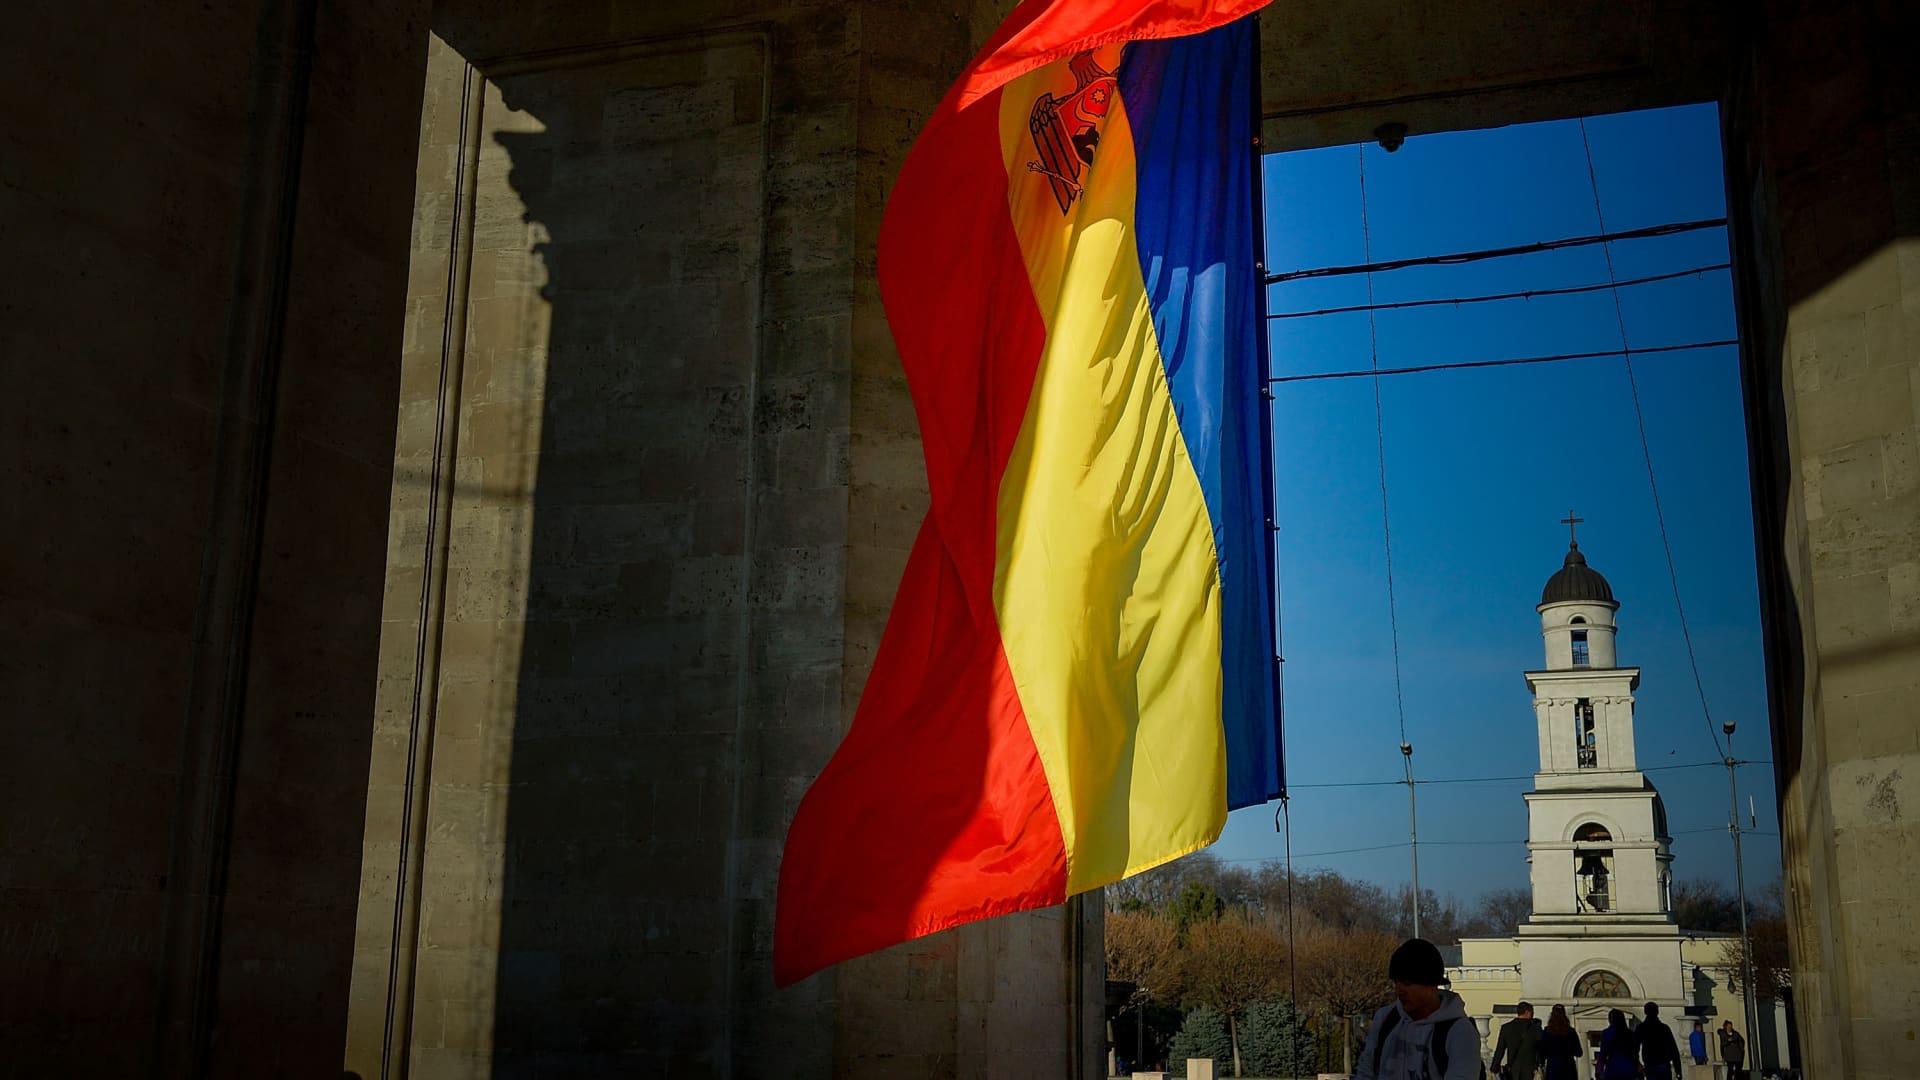 Moldova, a small eastern European nation which shares a border with Ukraine, has become the subject of Russian interference, according to its President.